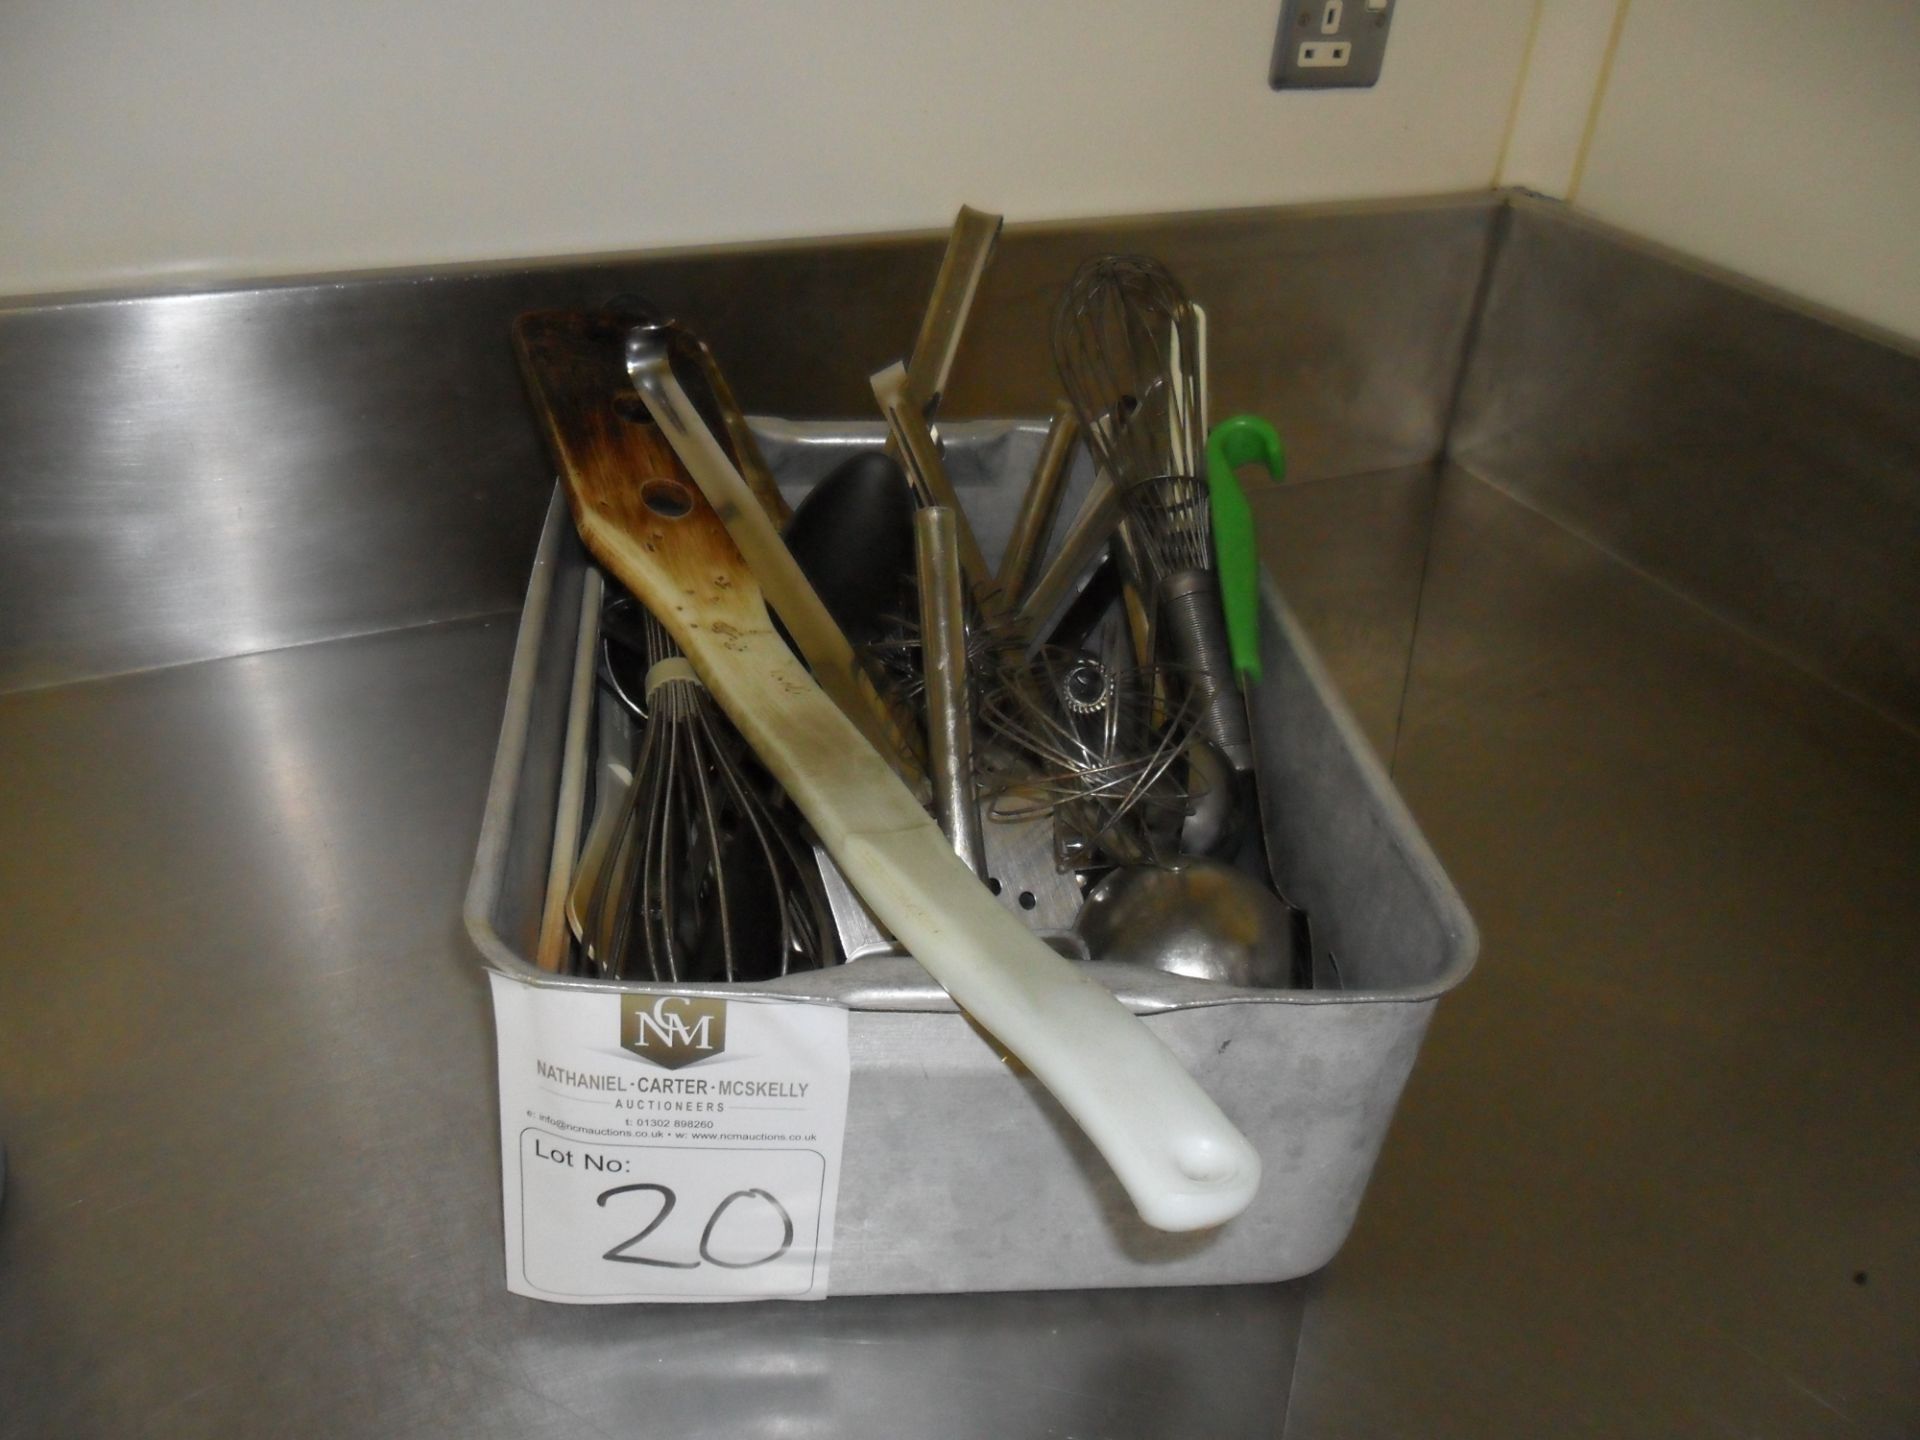 Various utensils. Includes catering whisks, scoops, spatulas. Please see photo for more details.